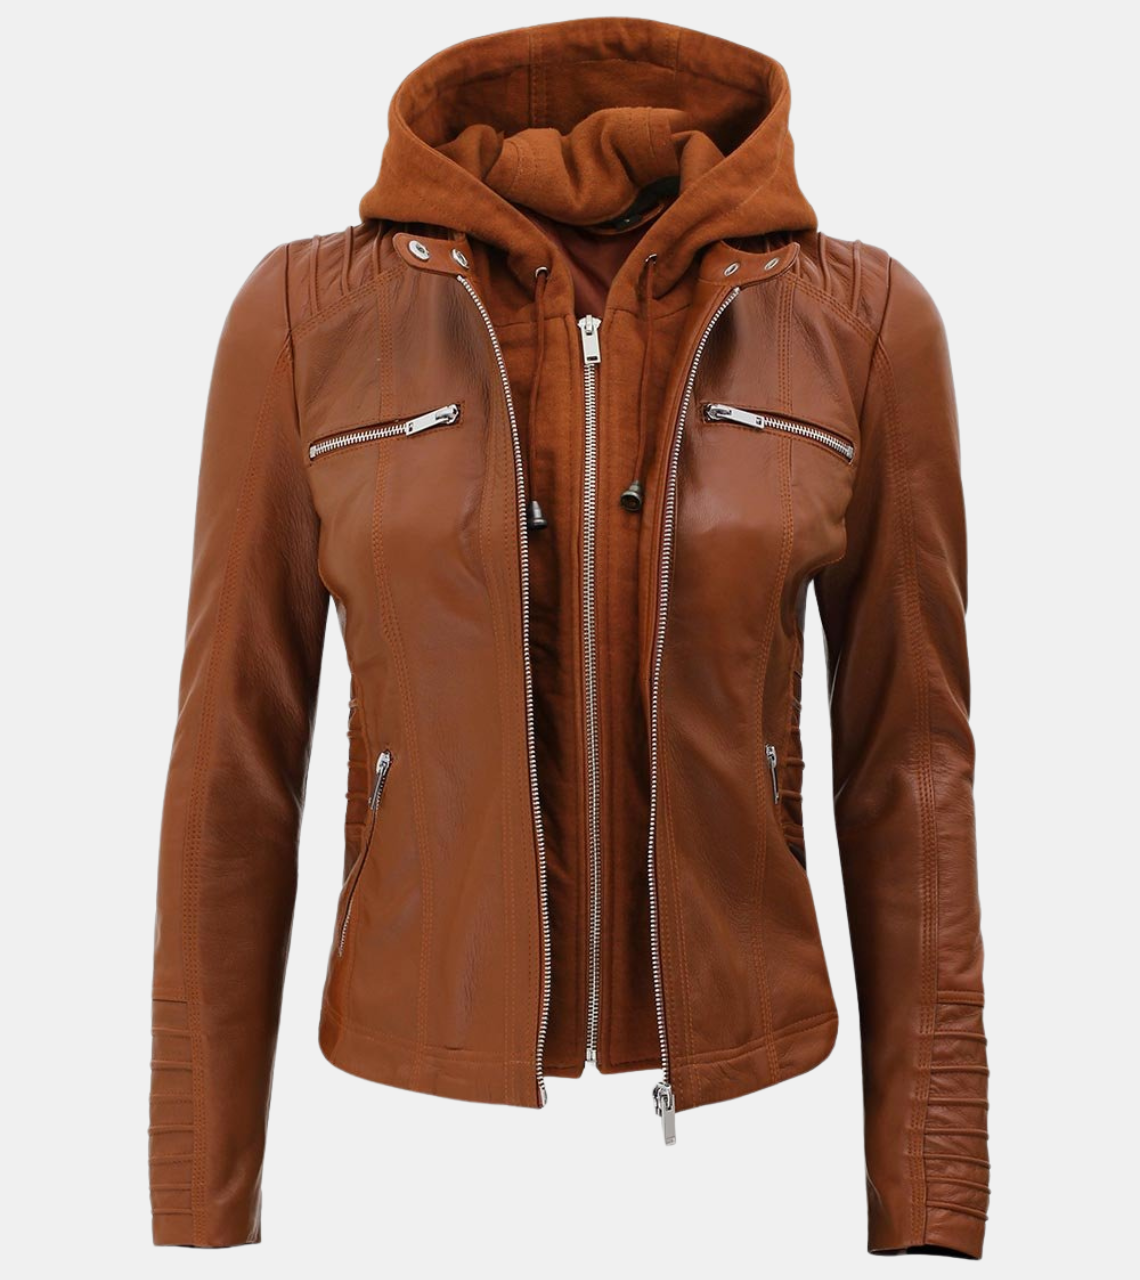 Aria Women's Removable Hooded Brown Leather Jacket